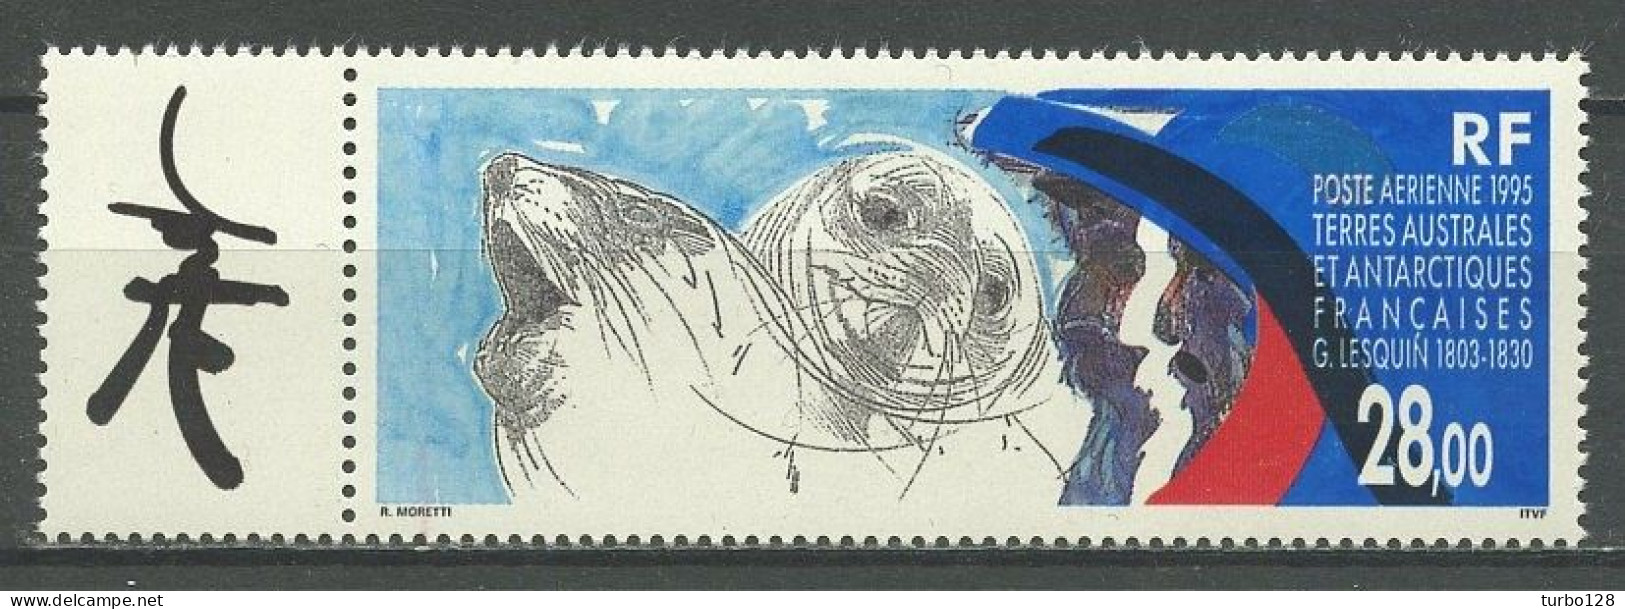 TAAF 1995 PA N° 136 ** Neuf MNH Superbe C 14,20 € Faune Animaux Animals - G. Lesquin Phoques - Luftpost